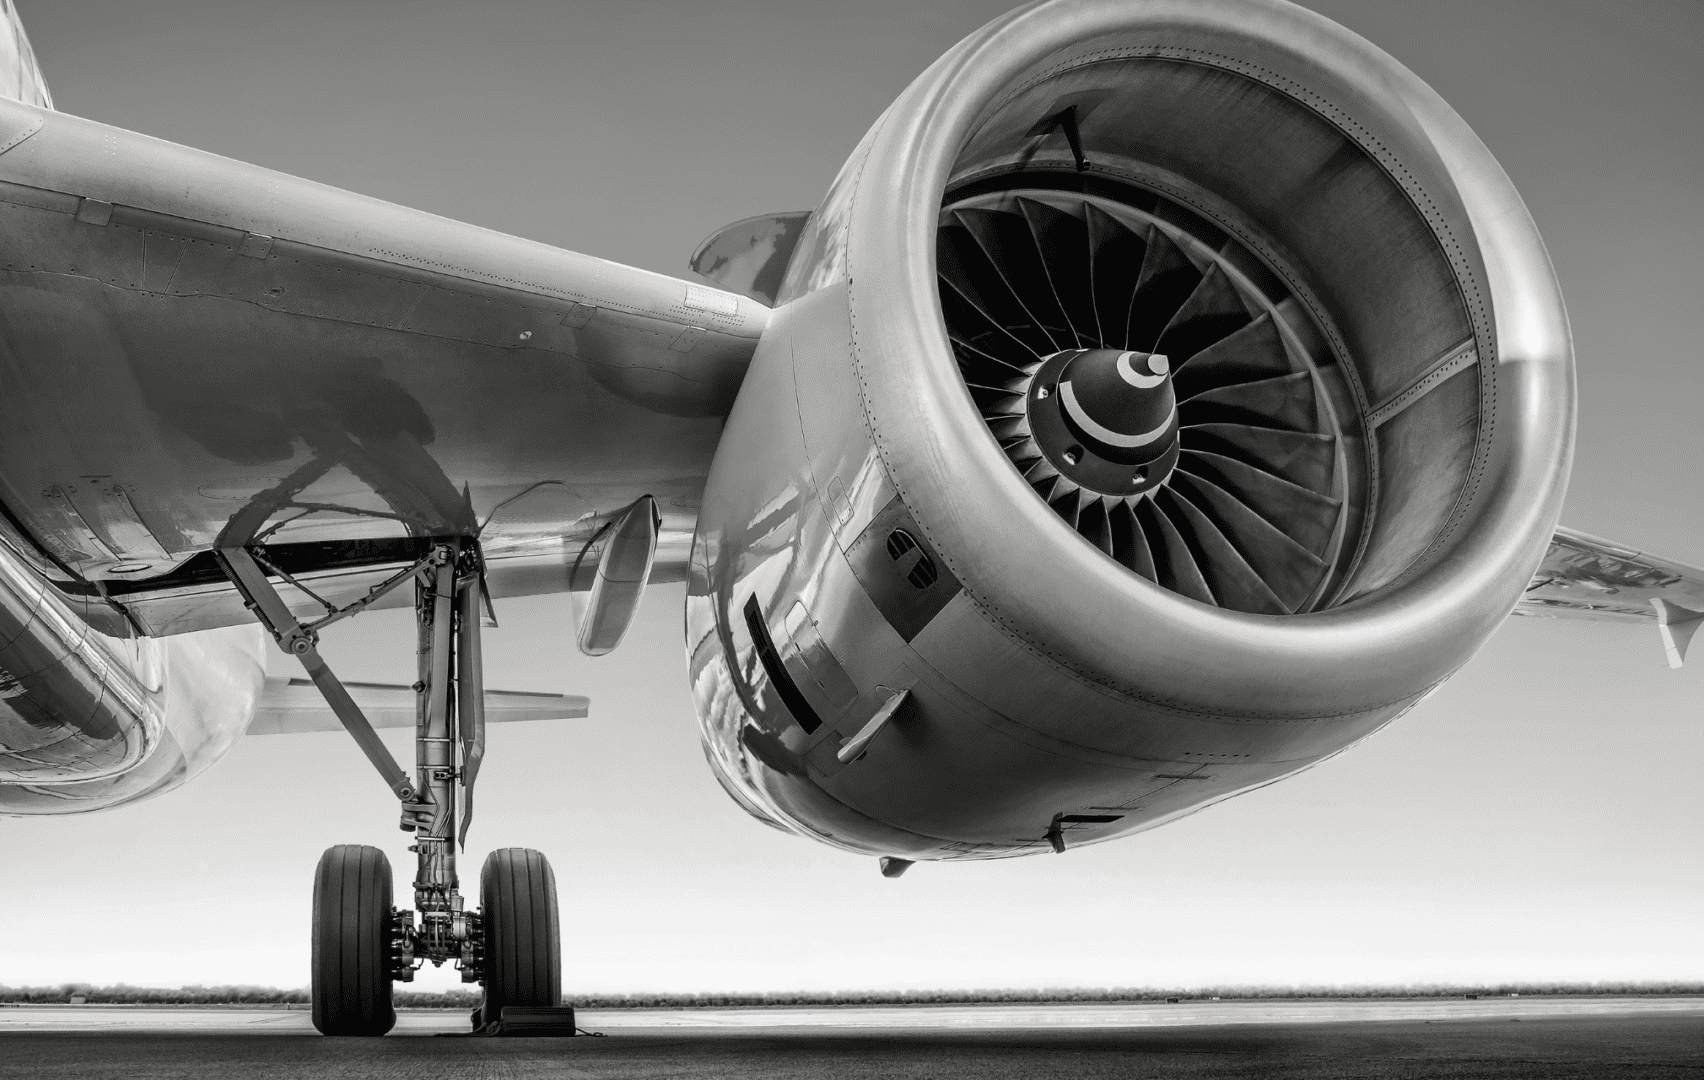 A close up of the underside of an airplane.